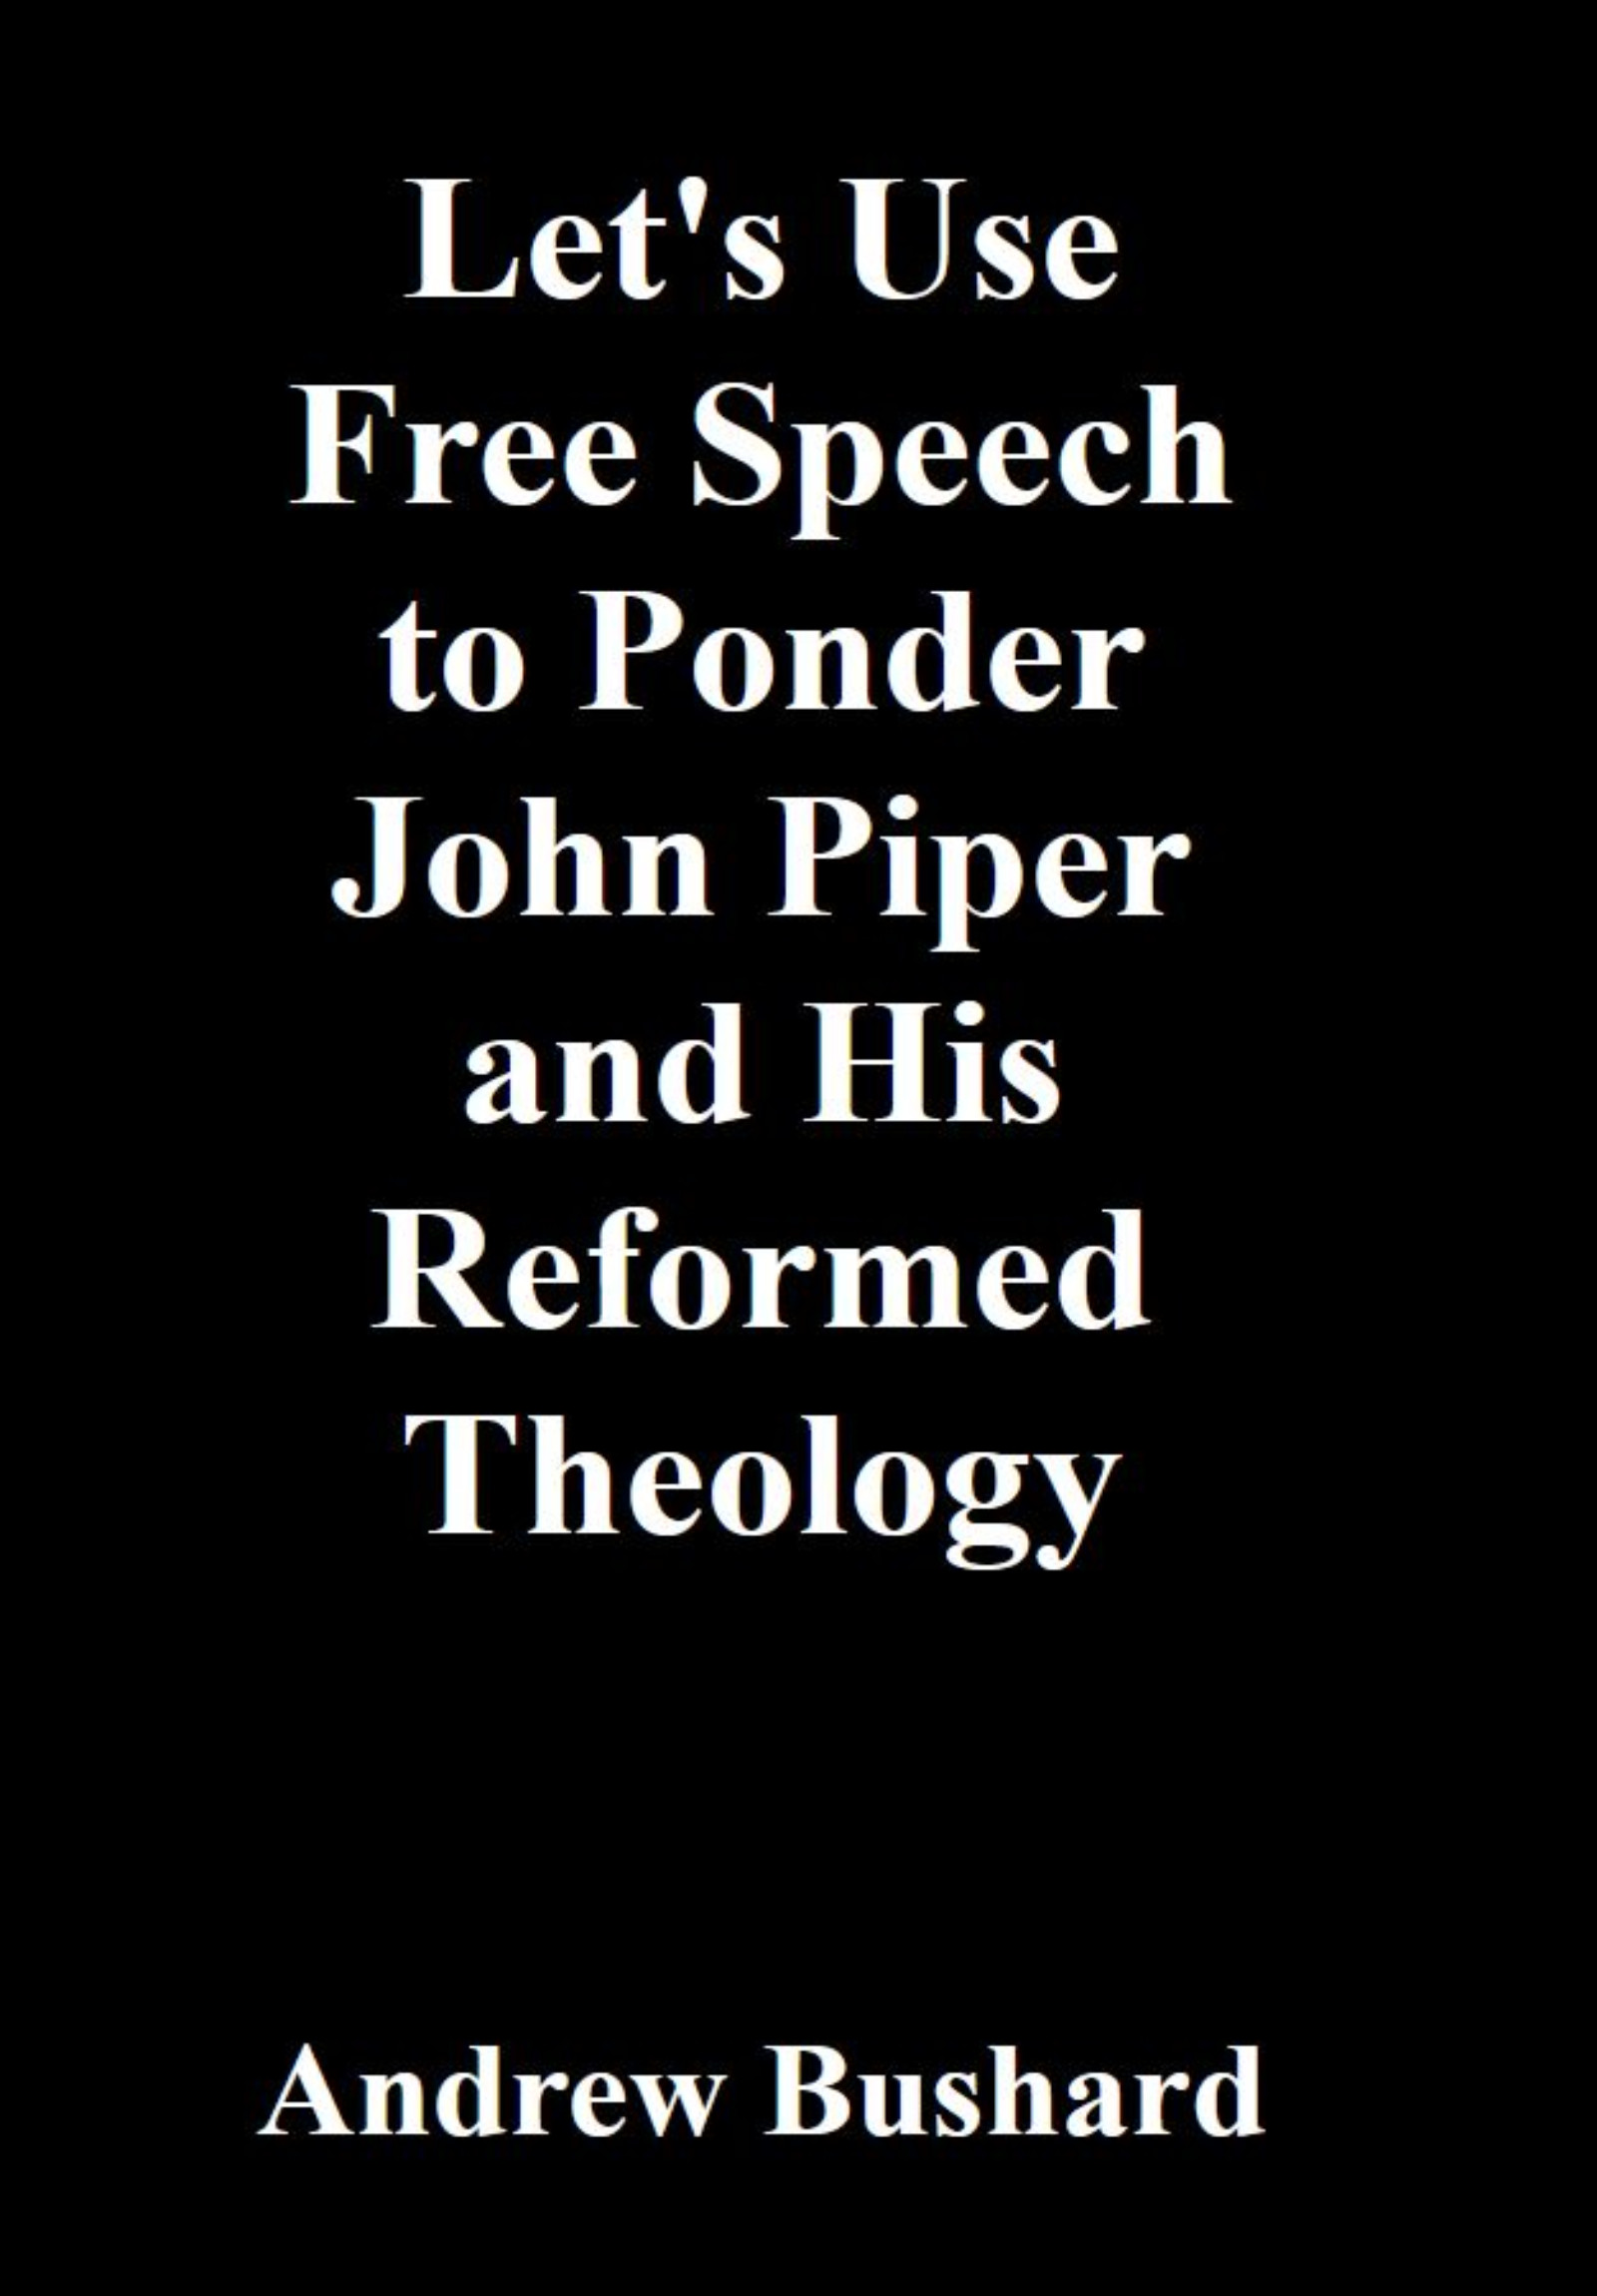 Let's Use Free Speech to Ponder John Piper and His Reformed Theology's featured image